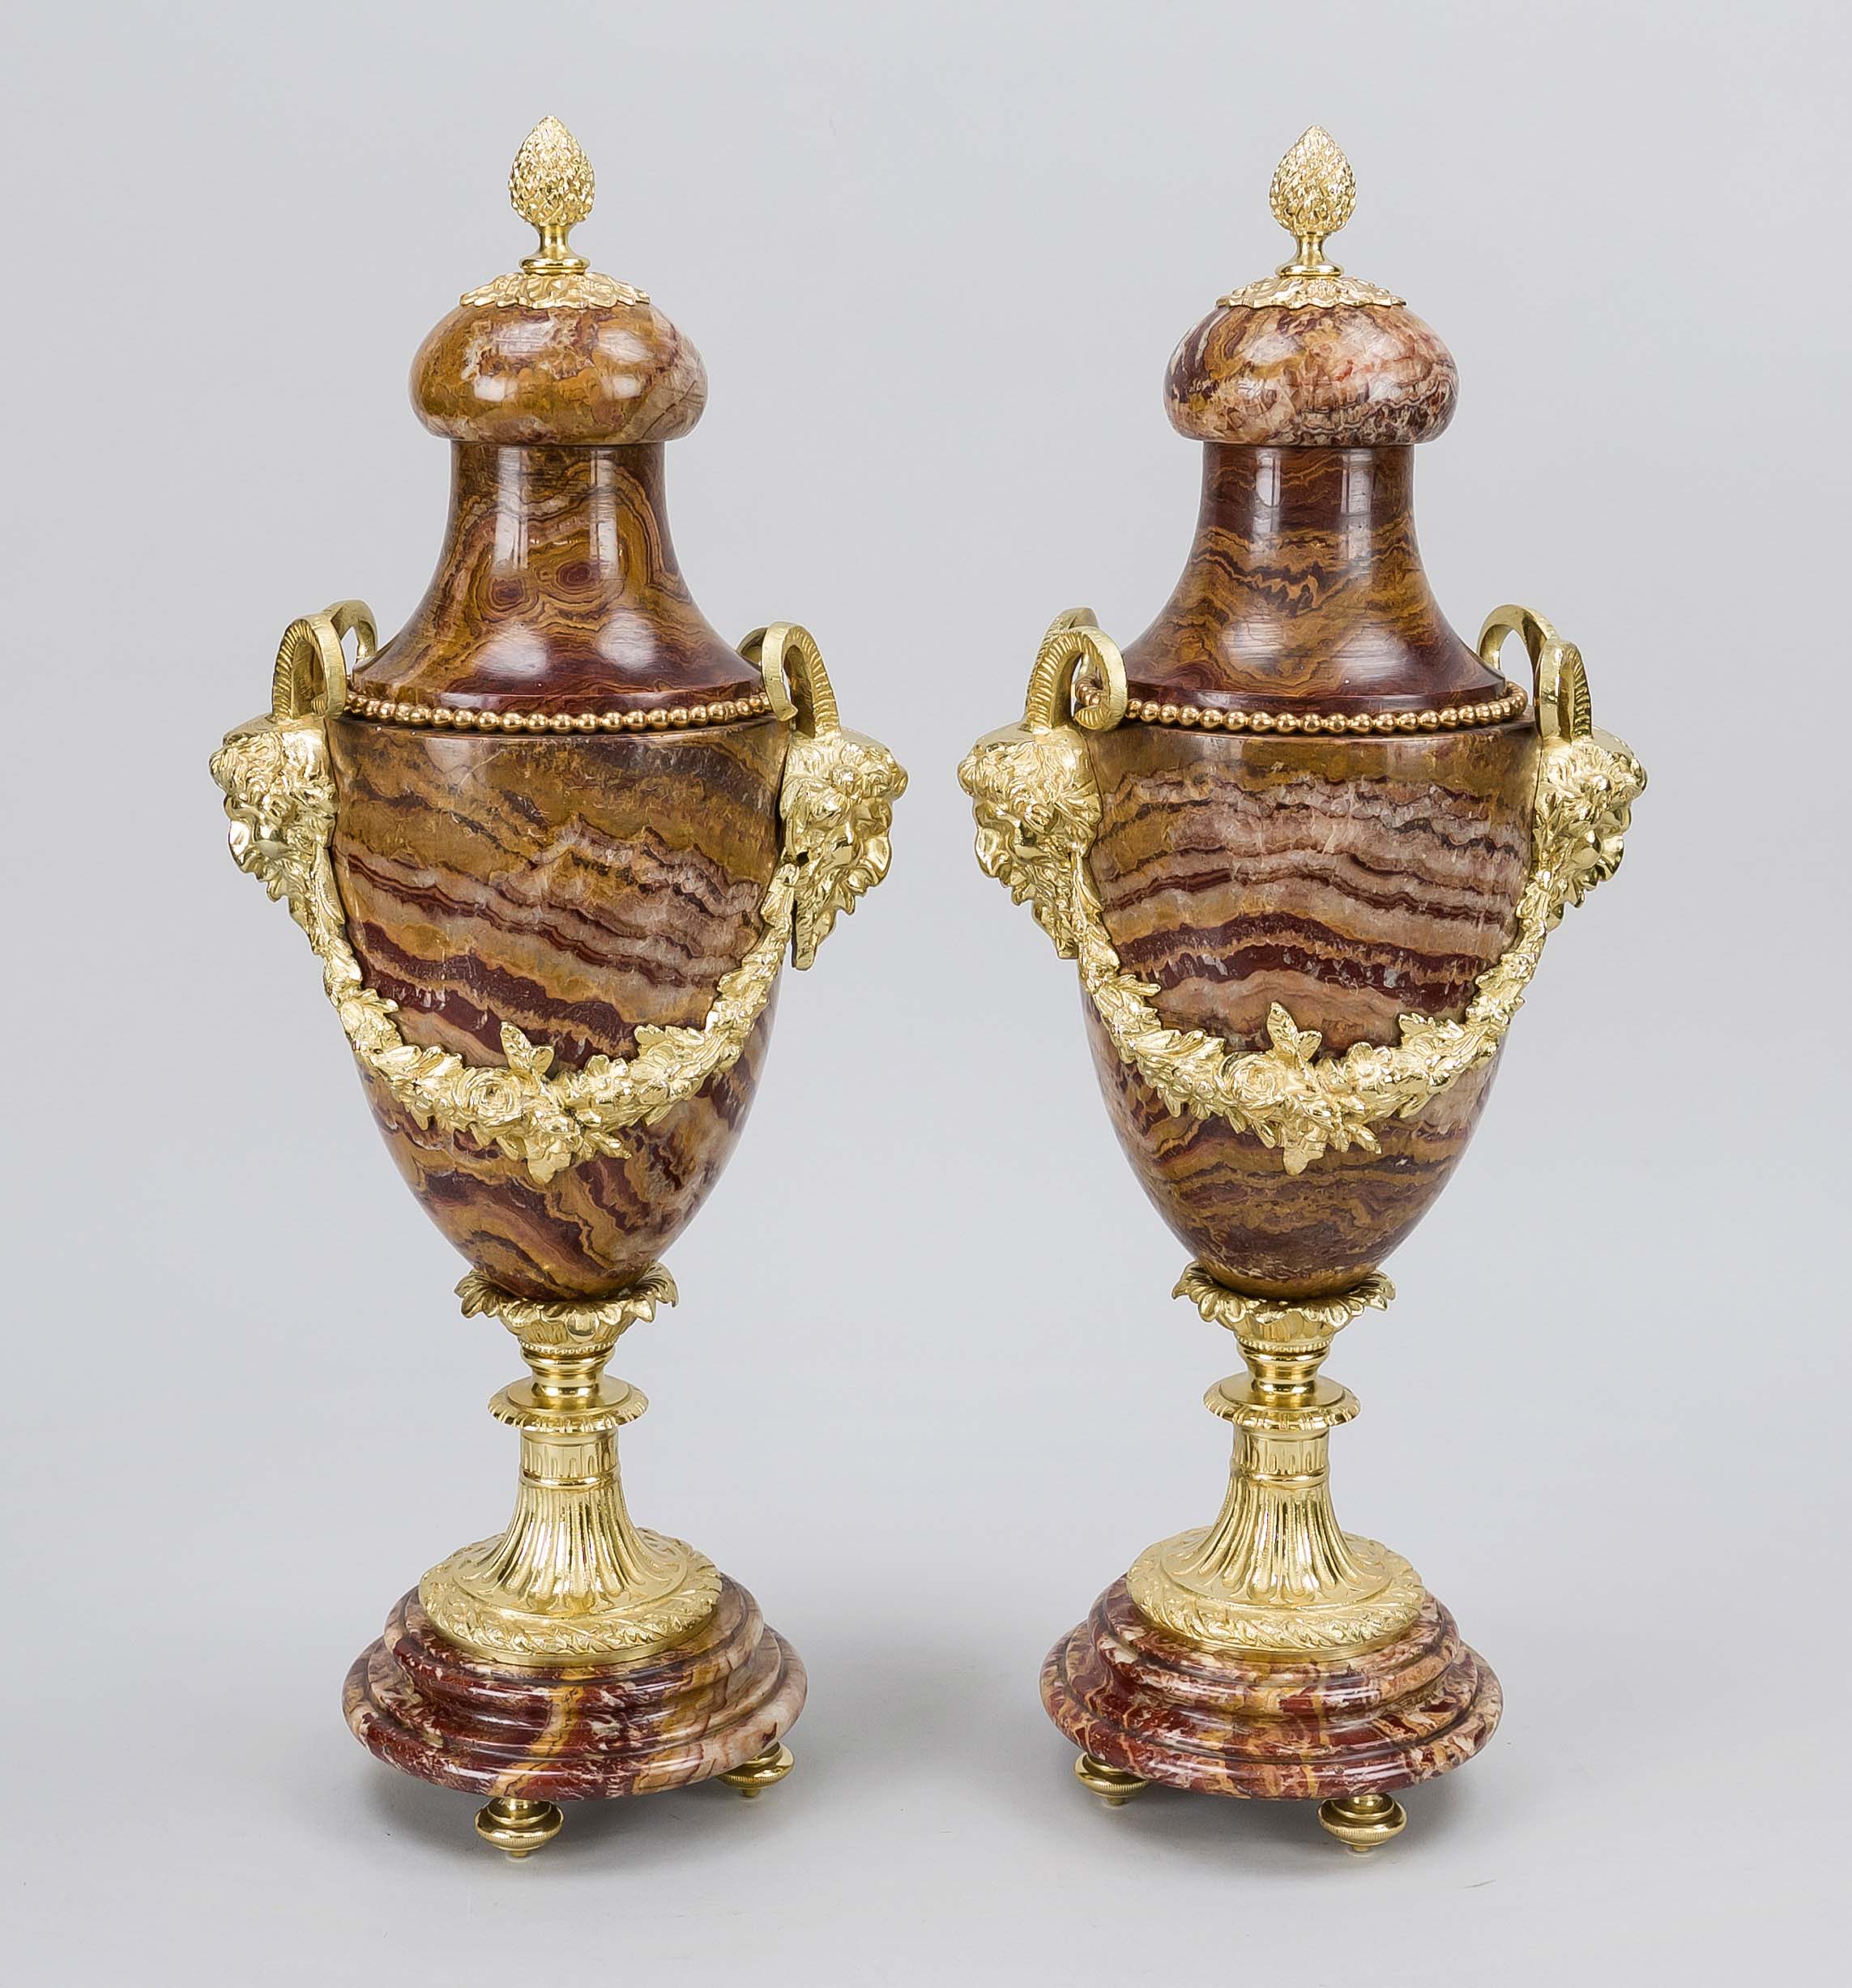 Pair of buck's head decorative vases, 20th century, polished stone and gilded mounting and